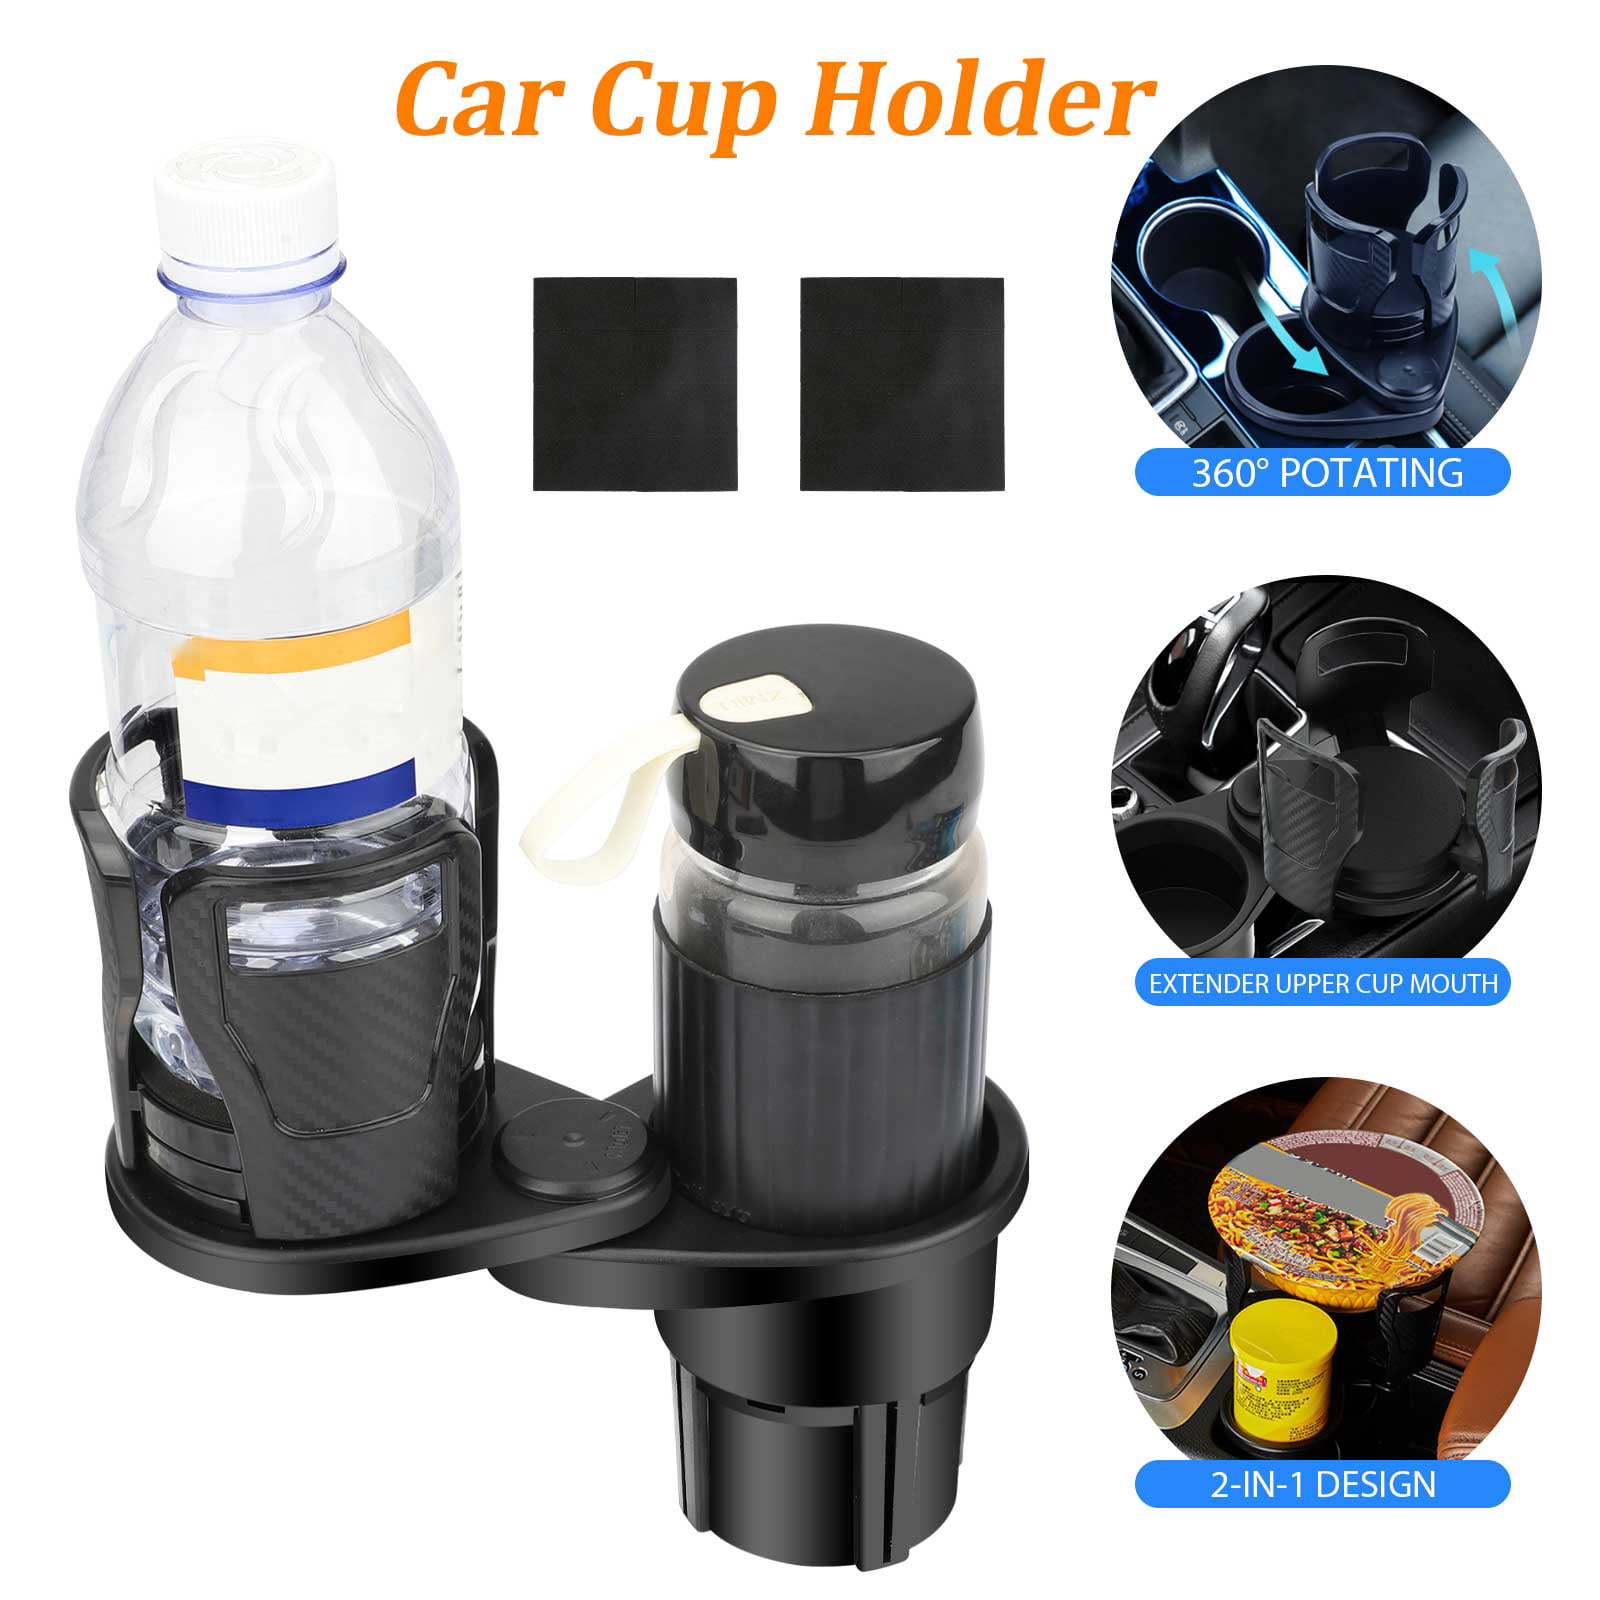 2PC 2021 Car Cup Holder Insert Expander Adapter 2 in 1 Multifunctional Universal Insert Car Vehicle-Mounted Car Cup Holder and Organizer Car Dual Cup Mount Adjustable Stand Expander